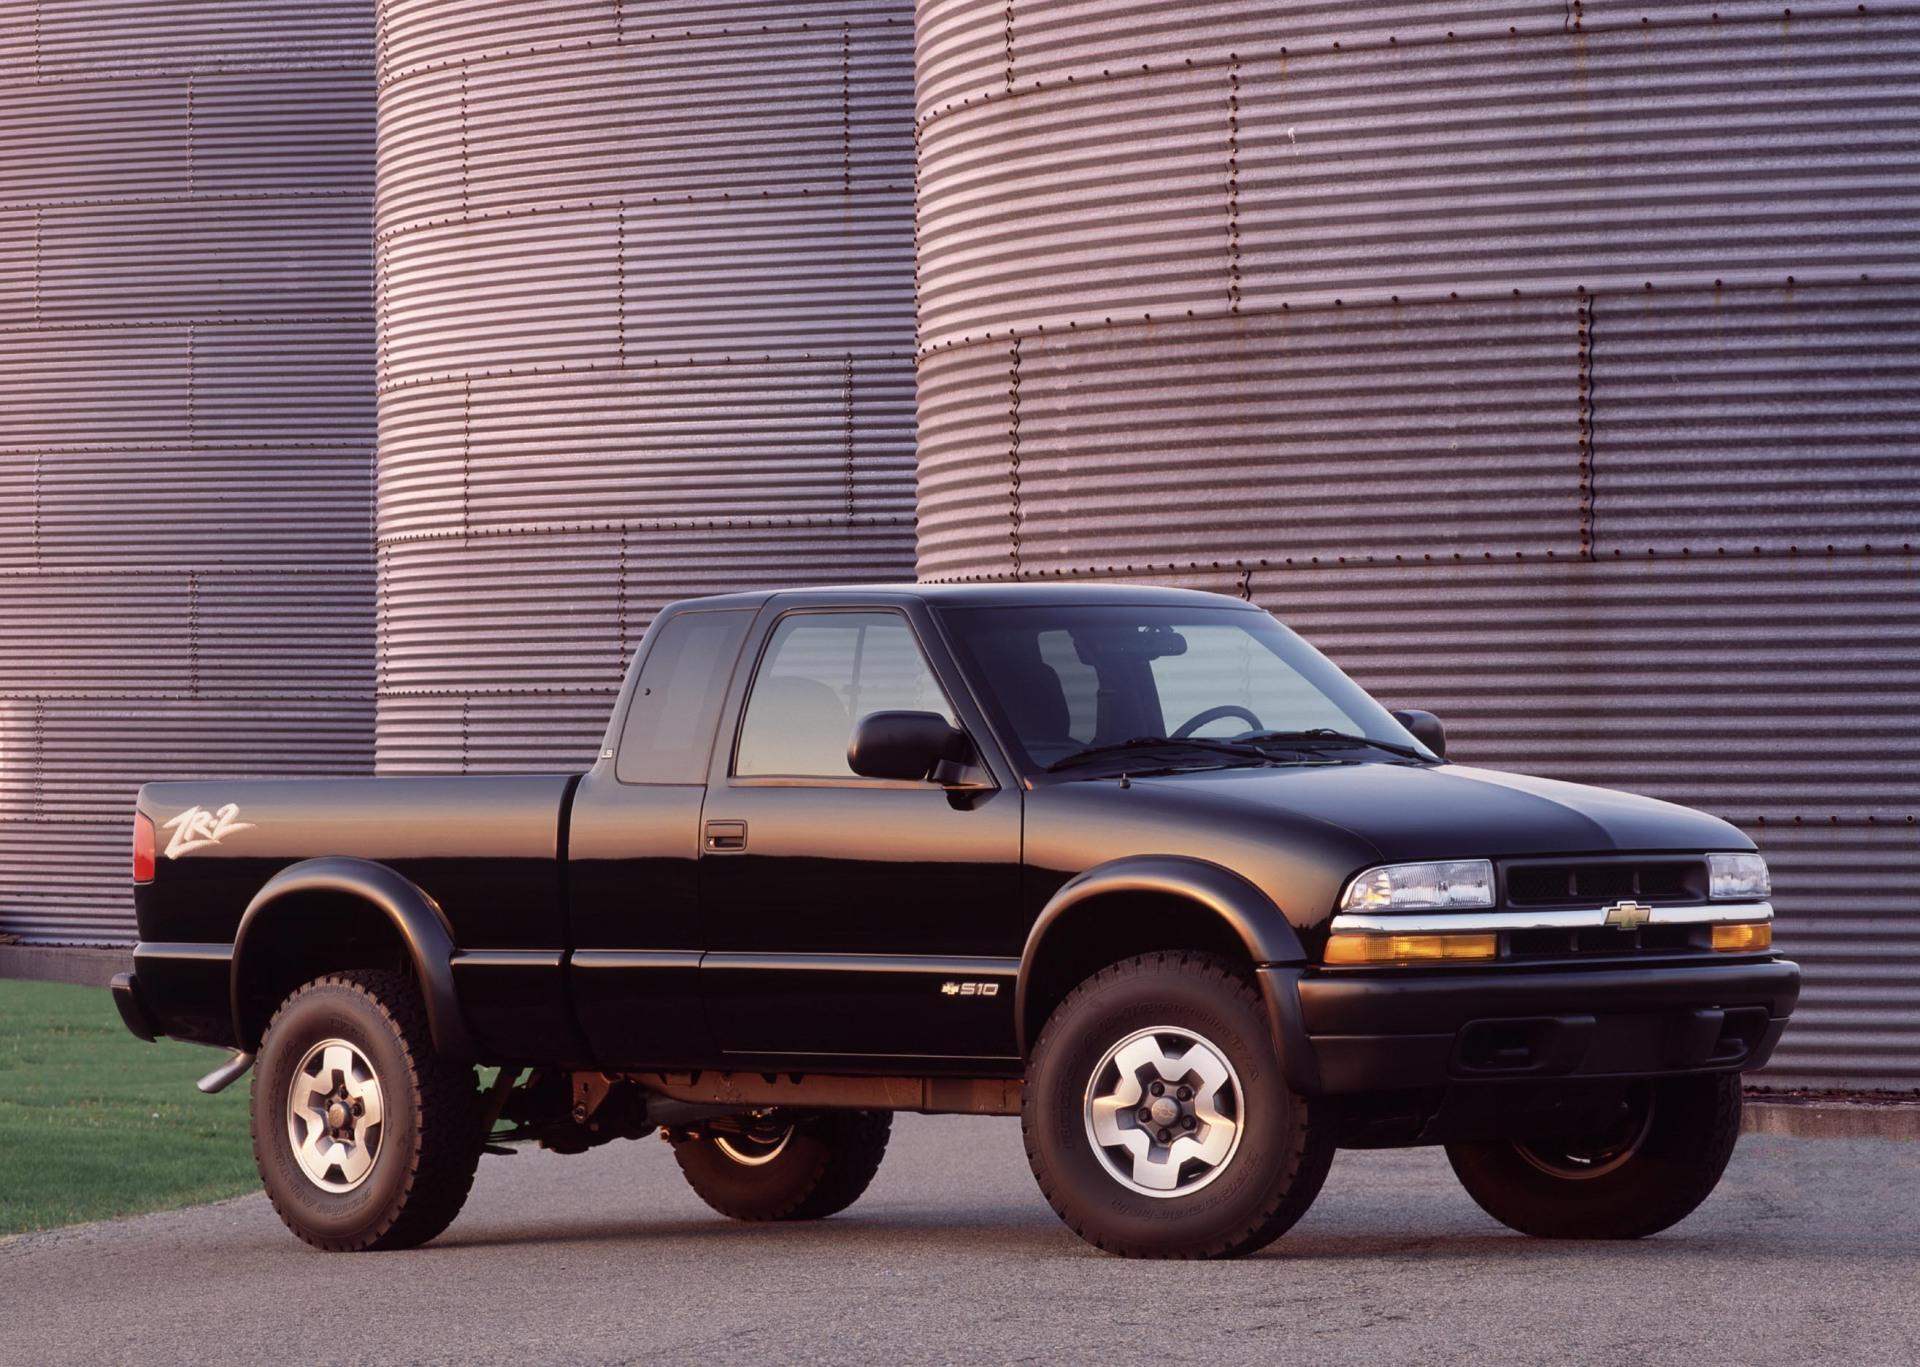 Chevrolet S10 Wallpaper and Image Gallery - .com